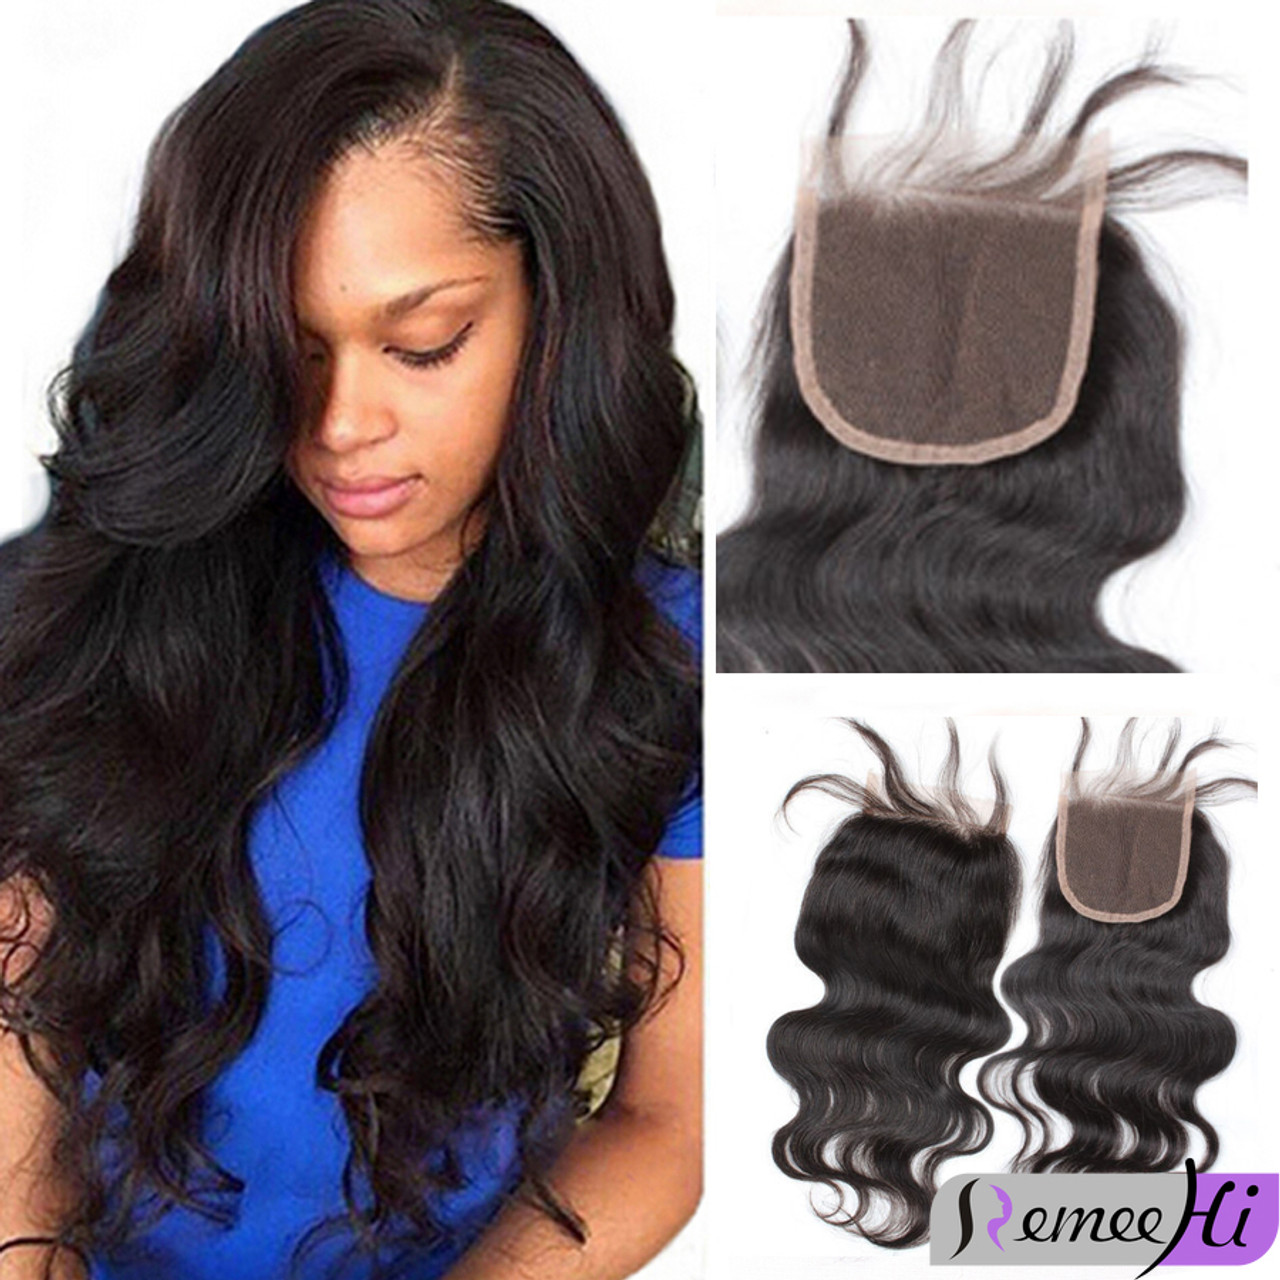 Remeehi Body Wave 4 4 Lace Closure 100 Remy Hair With Baby Hair Free Middle 3 Part Free Shipping